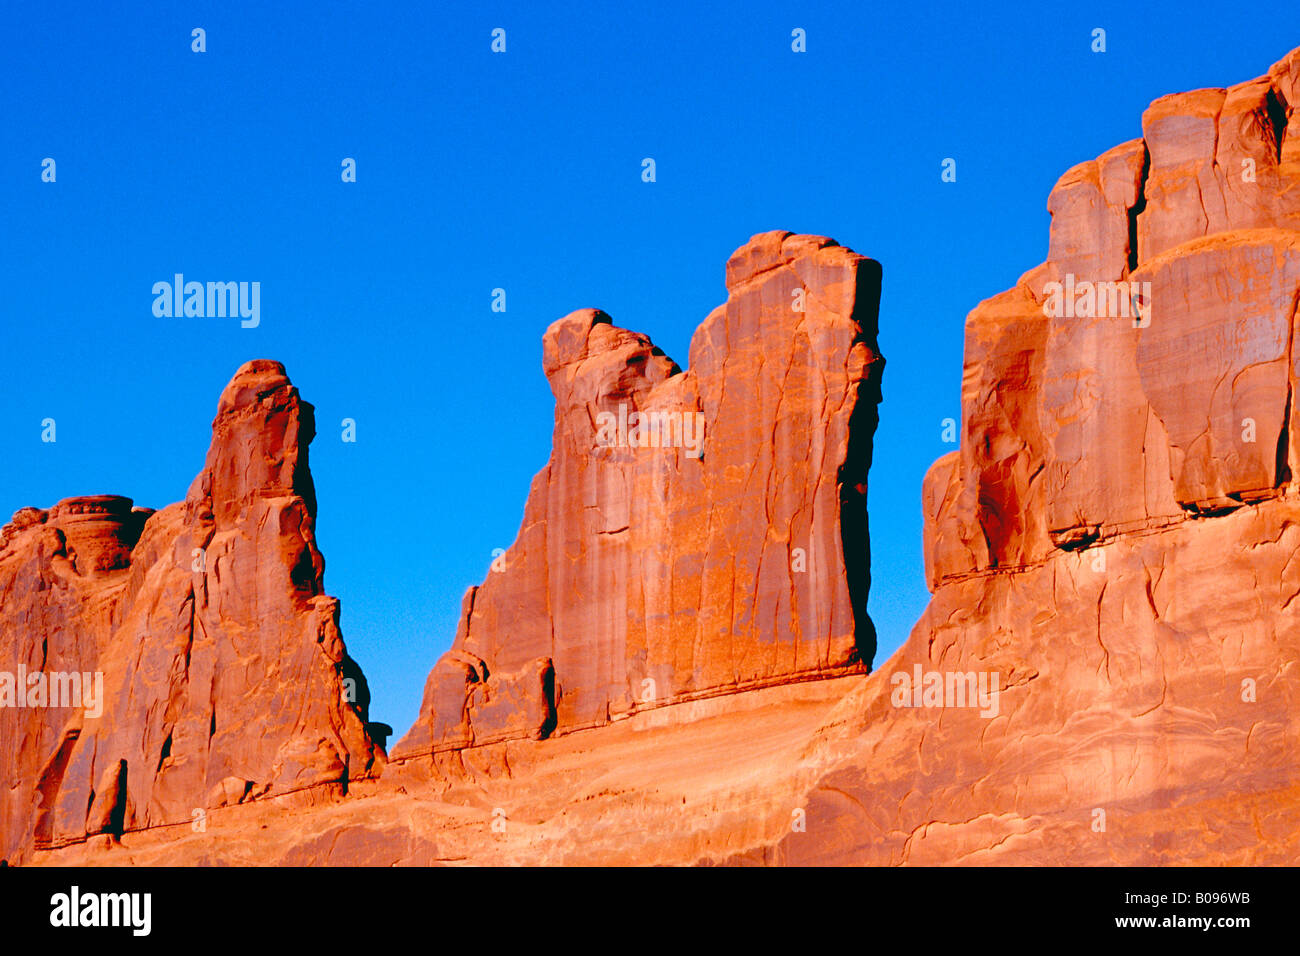 Courthouse Towers, Arches National Park, Utah, Stati Uniti d'America Foto Stock